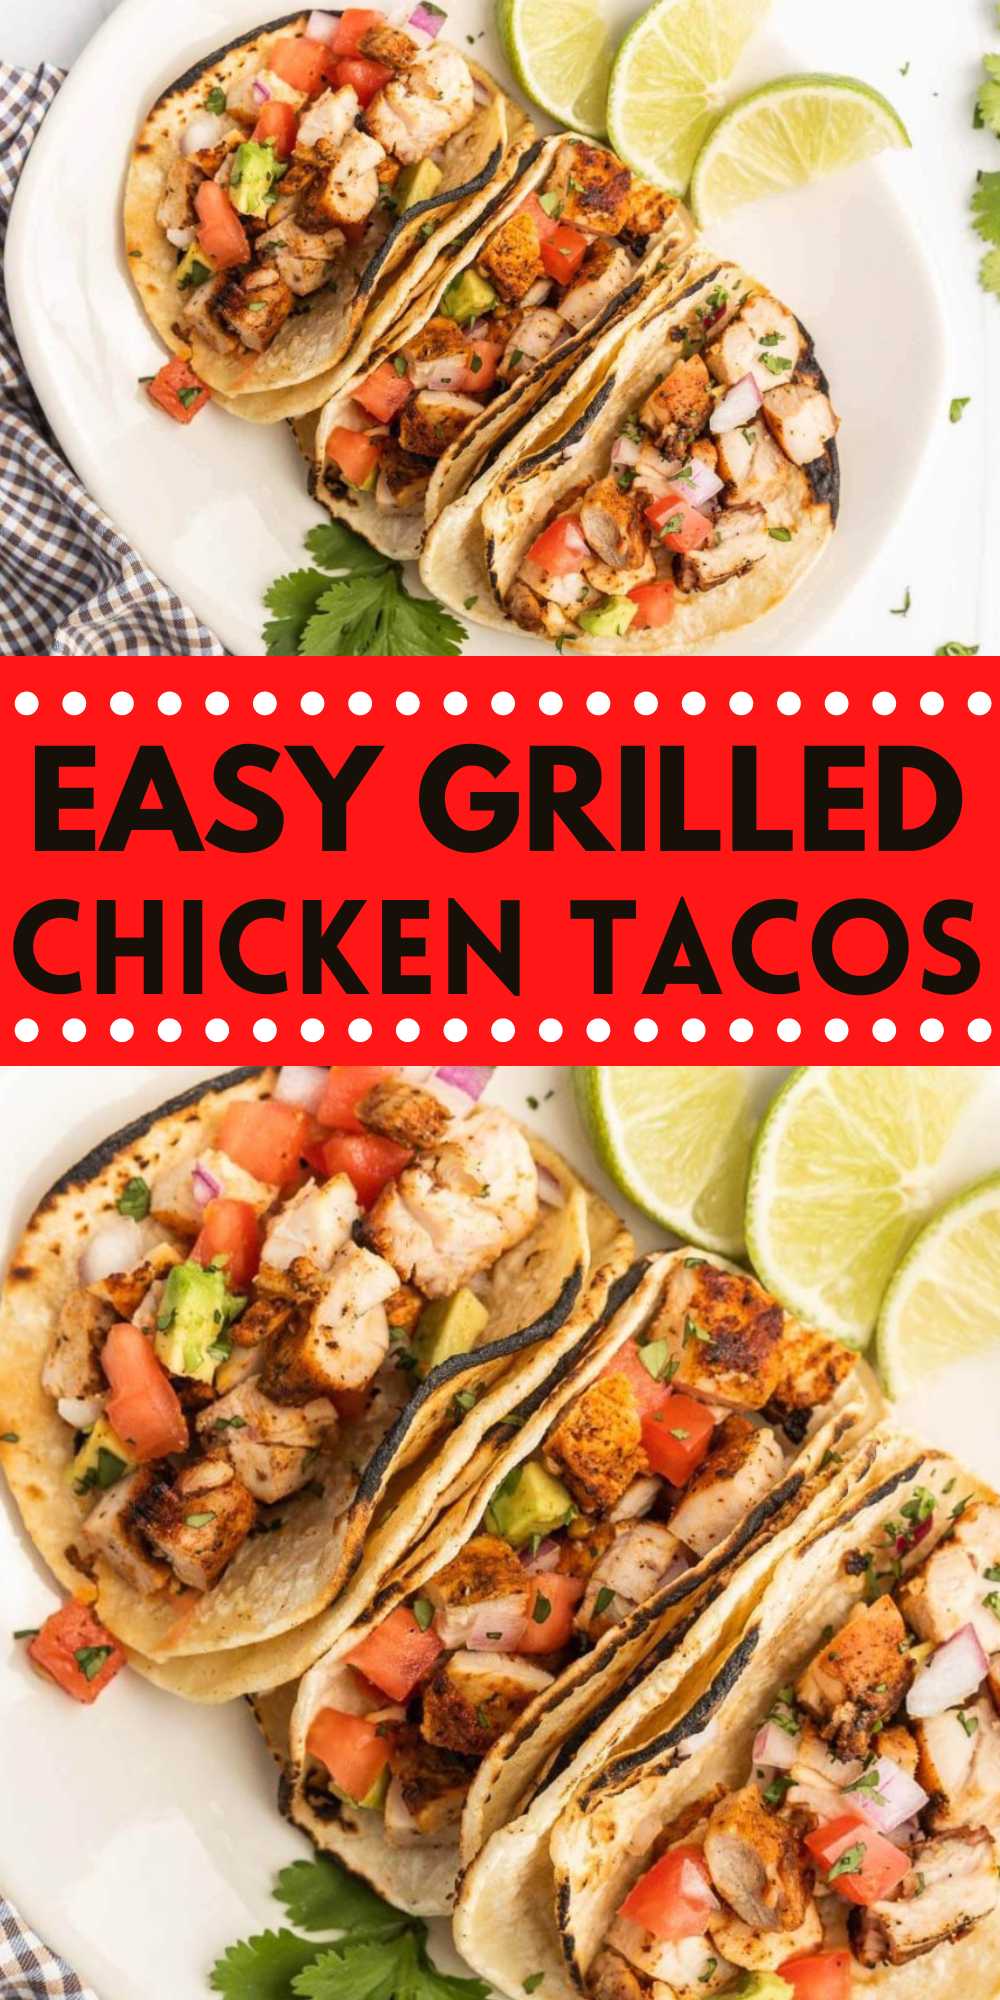 Grilled Chicken Tacos take minutes to make and is packed with authentic flavor. The chicken is topped with fresh avocado, onion and cilantro. The flavor from the grill and the marinade is delicious. Everyone can choose their favorite taco toppings and it is a great meal in minutes! #eatingonadime #grilledchickentacos #chickentacos